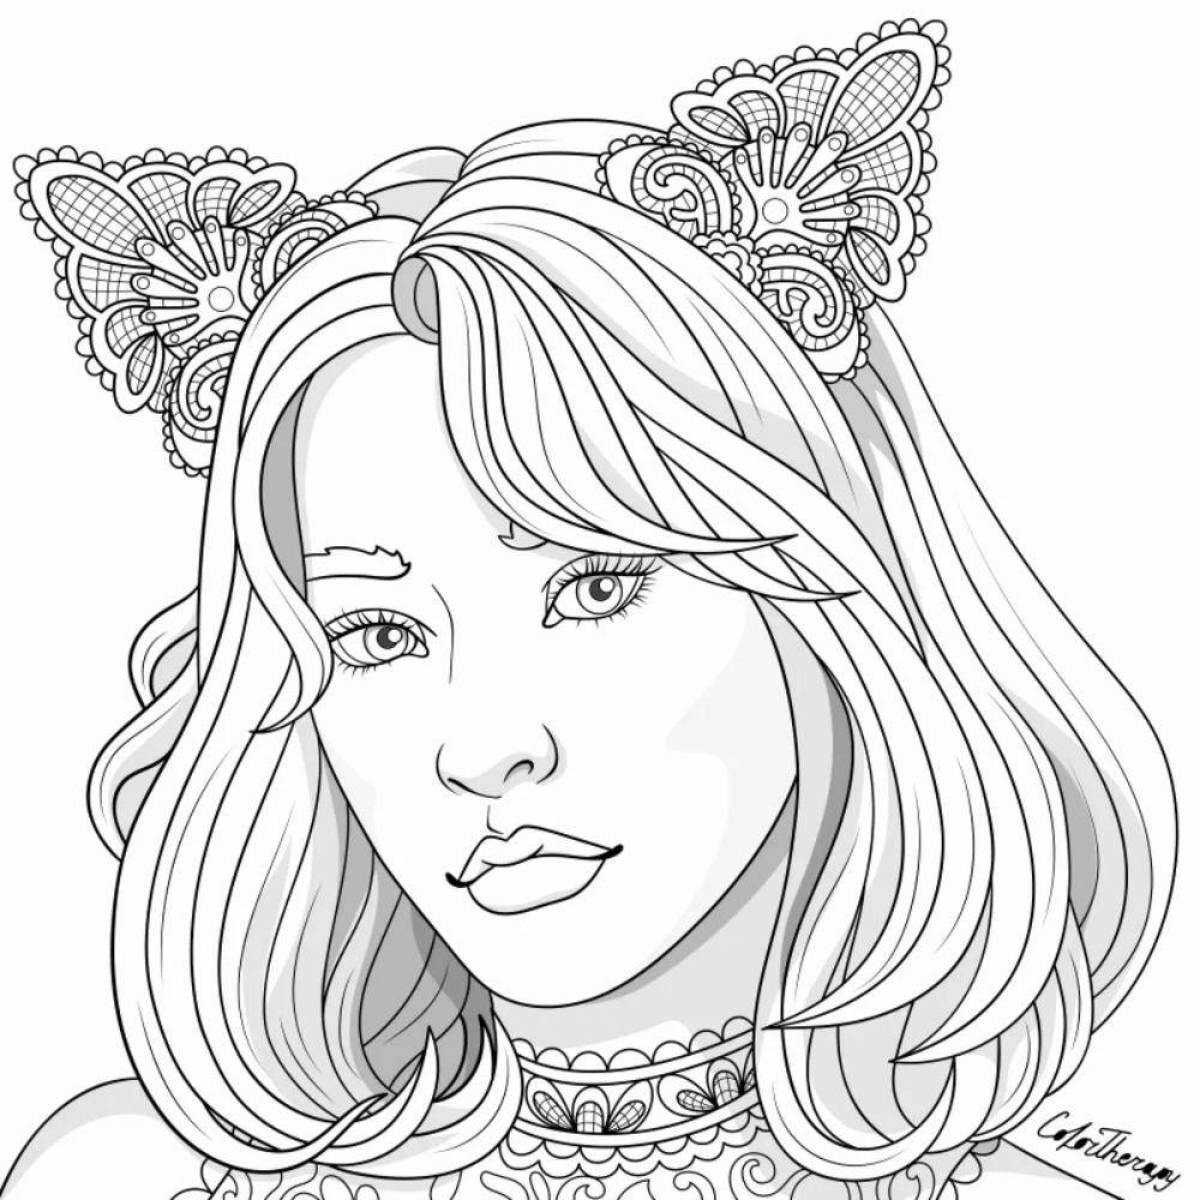 Nice adult girl coloring book